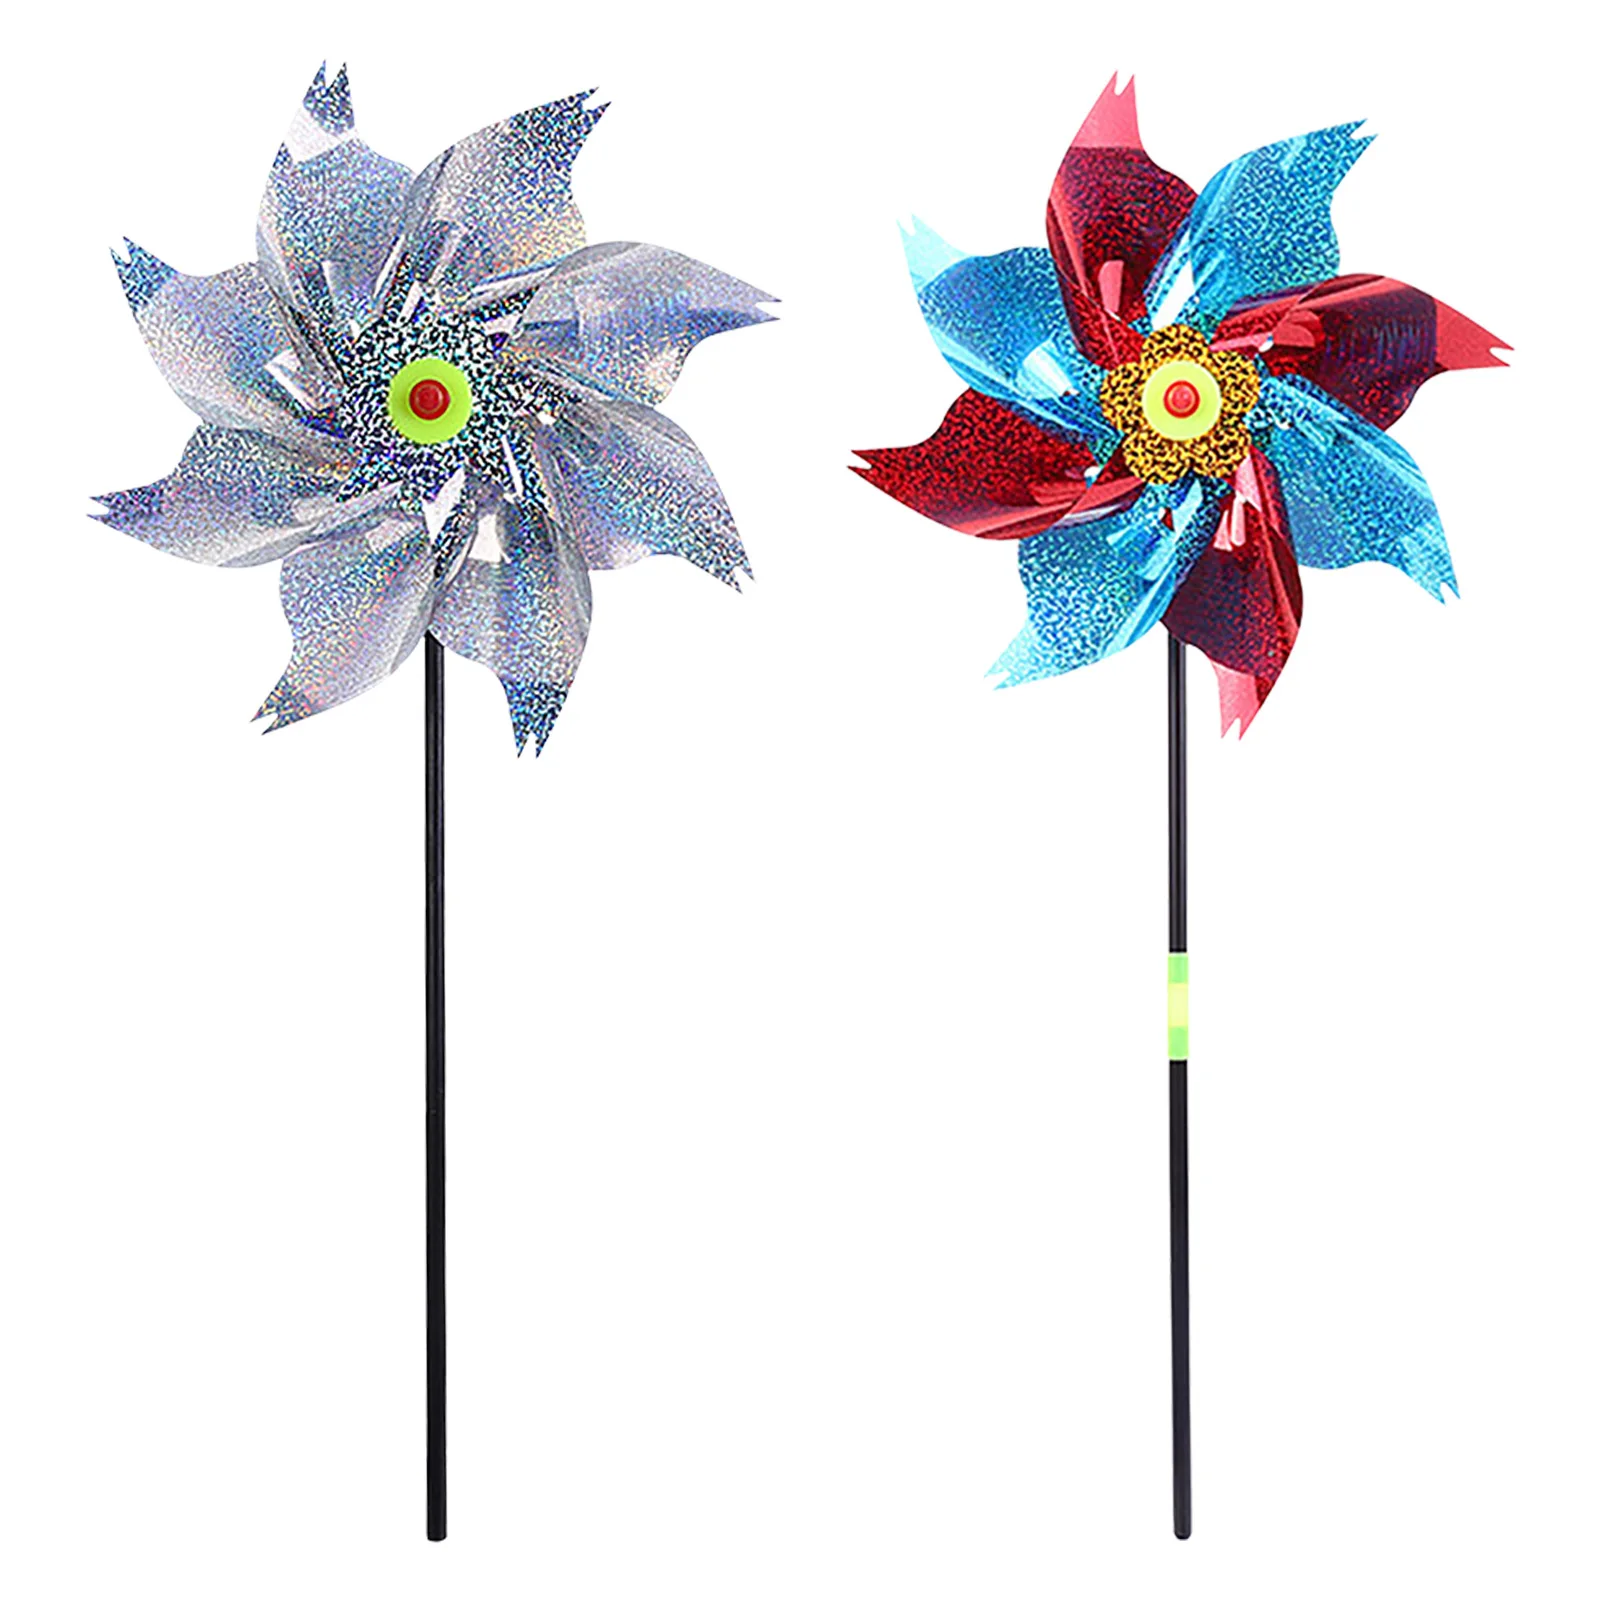 

8-Leaves Reflective Pinwheels With Stakes Bird Repeller Sparkly Pinwheel Windmill Protect Plant Flower Lawn Garden Decoration